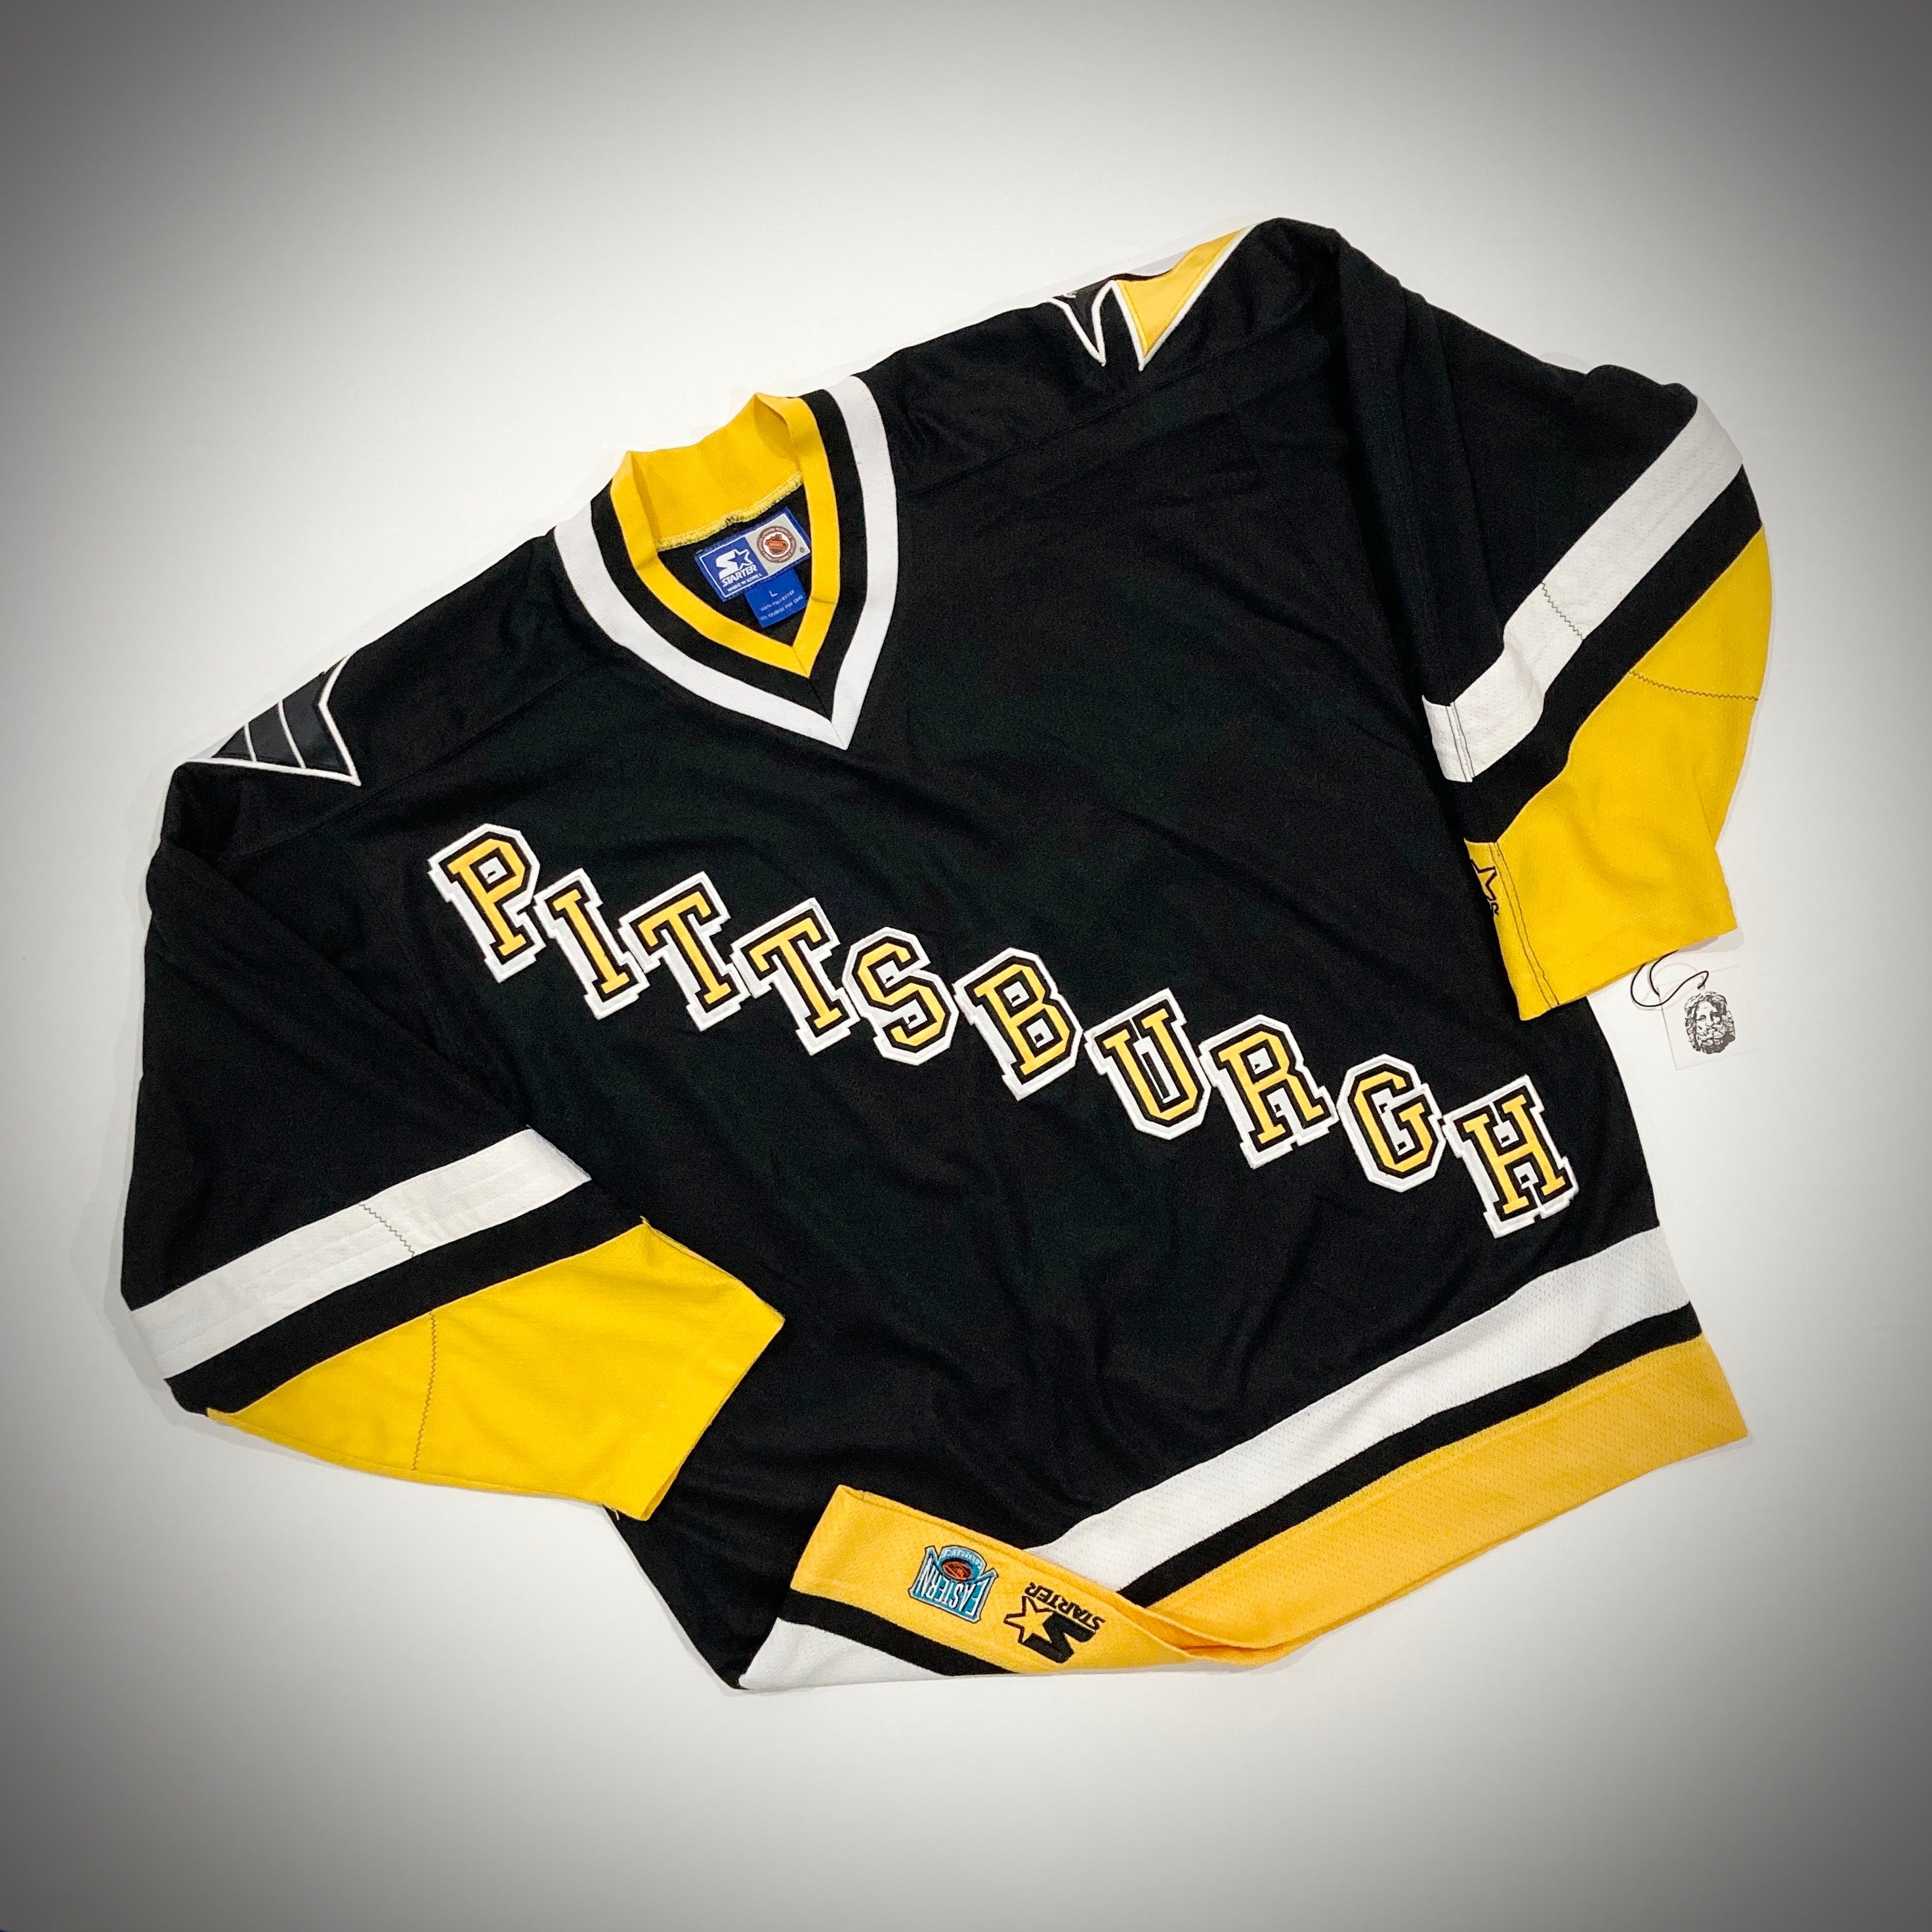 1994-99 Pittsburgh Penguins Starter Home Jersey (Very Good) L